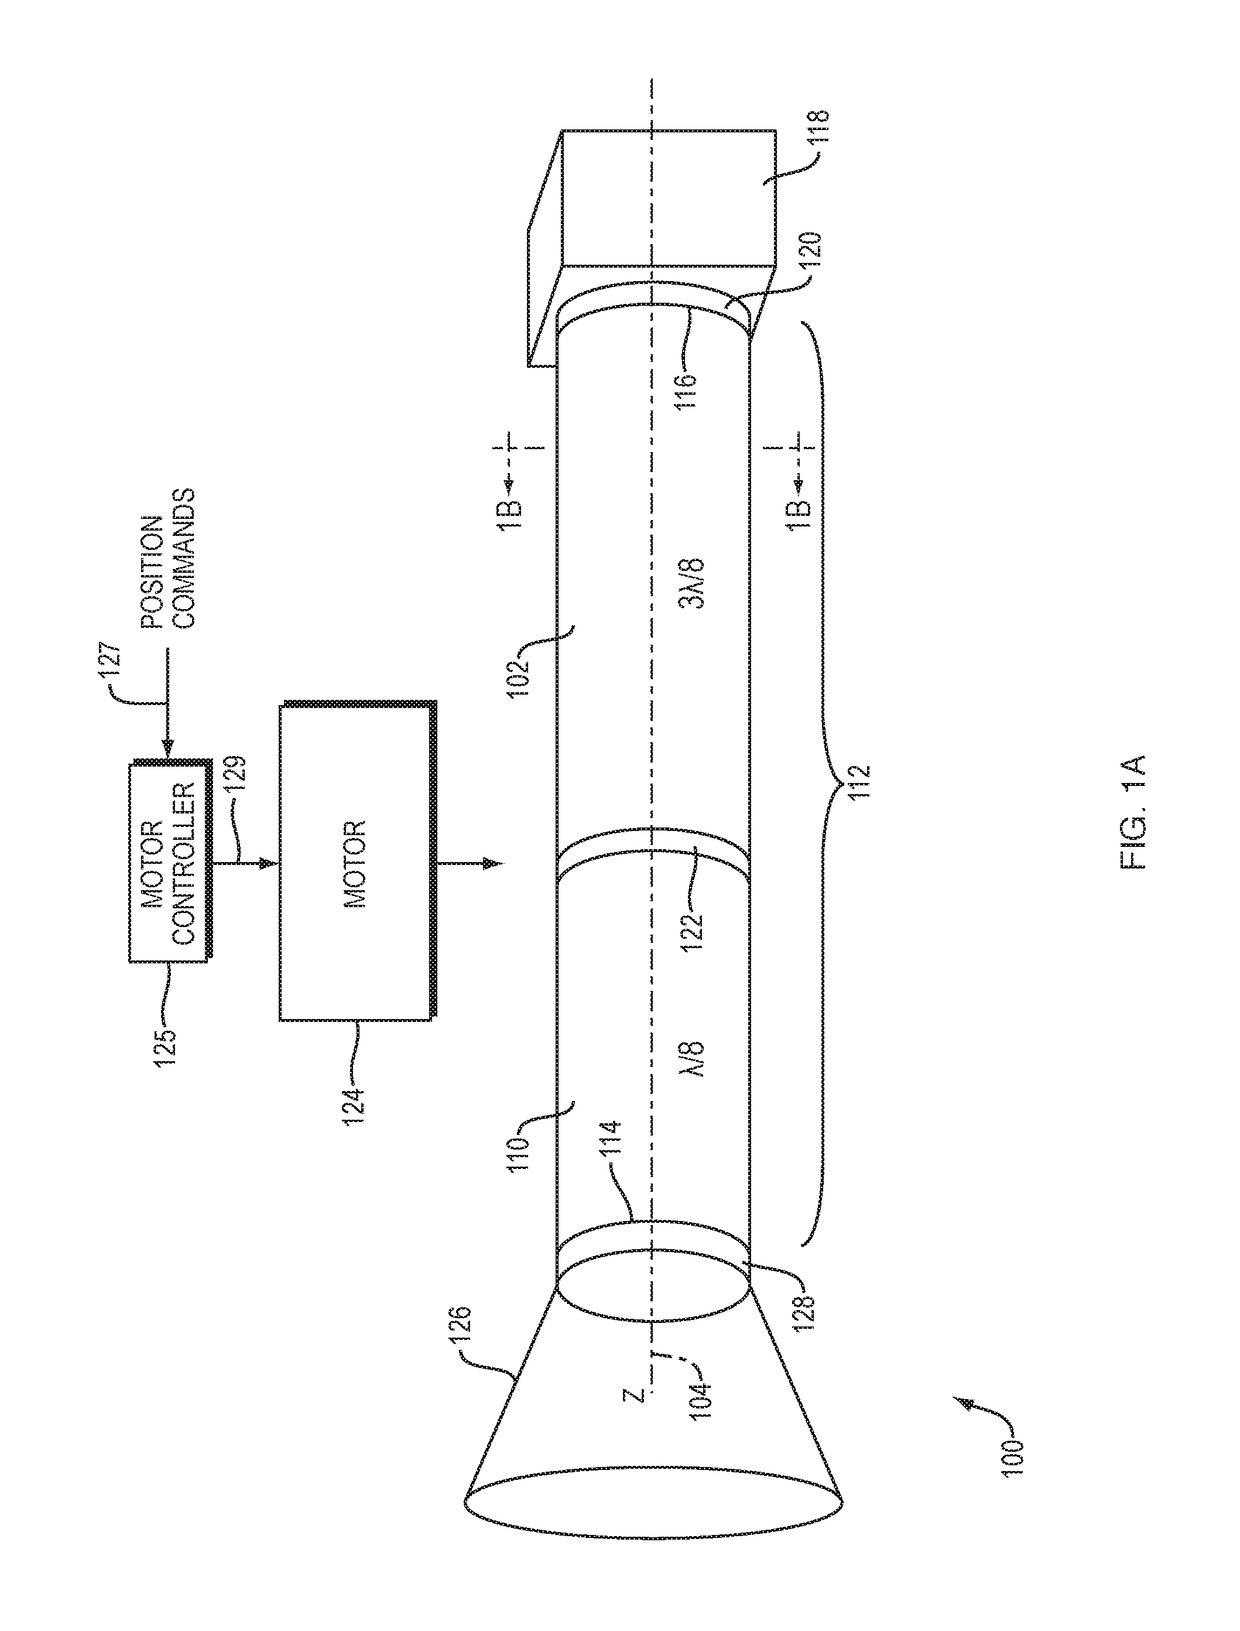 Waveguide device with switchable polarization configurations